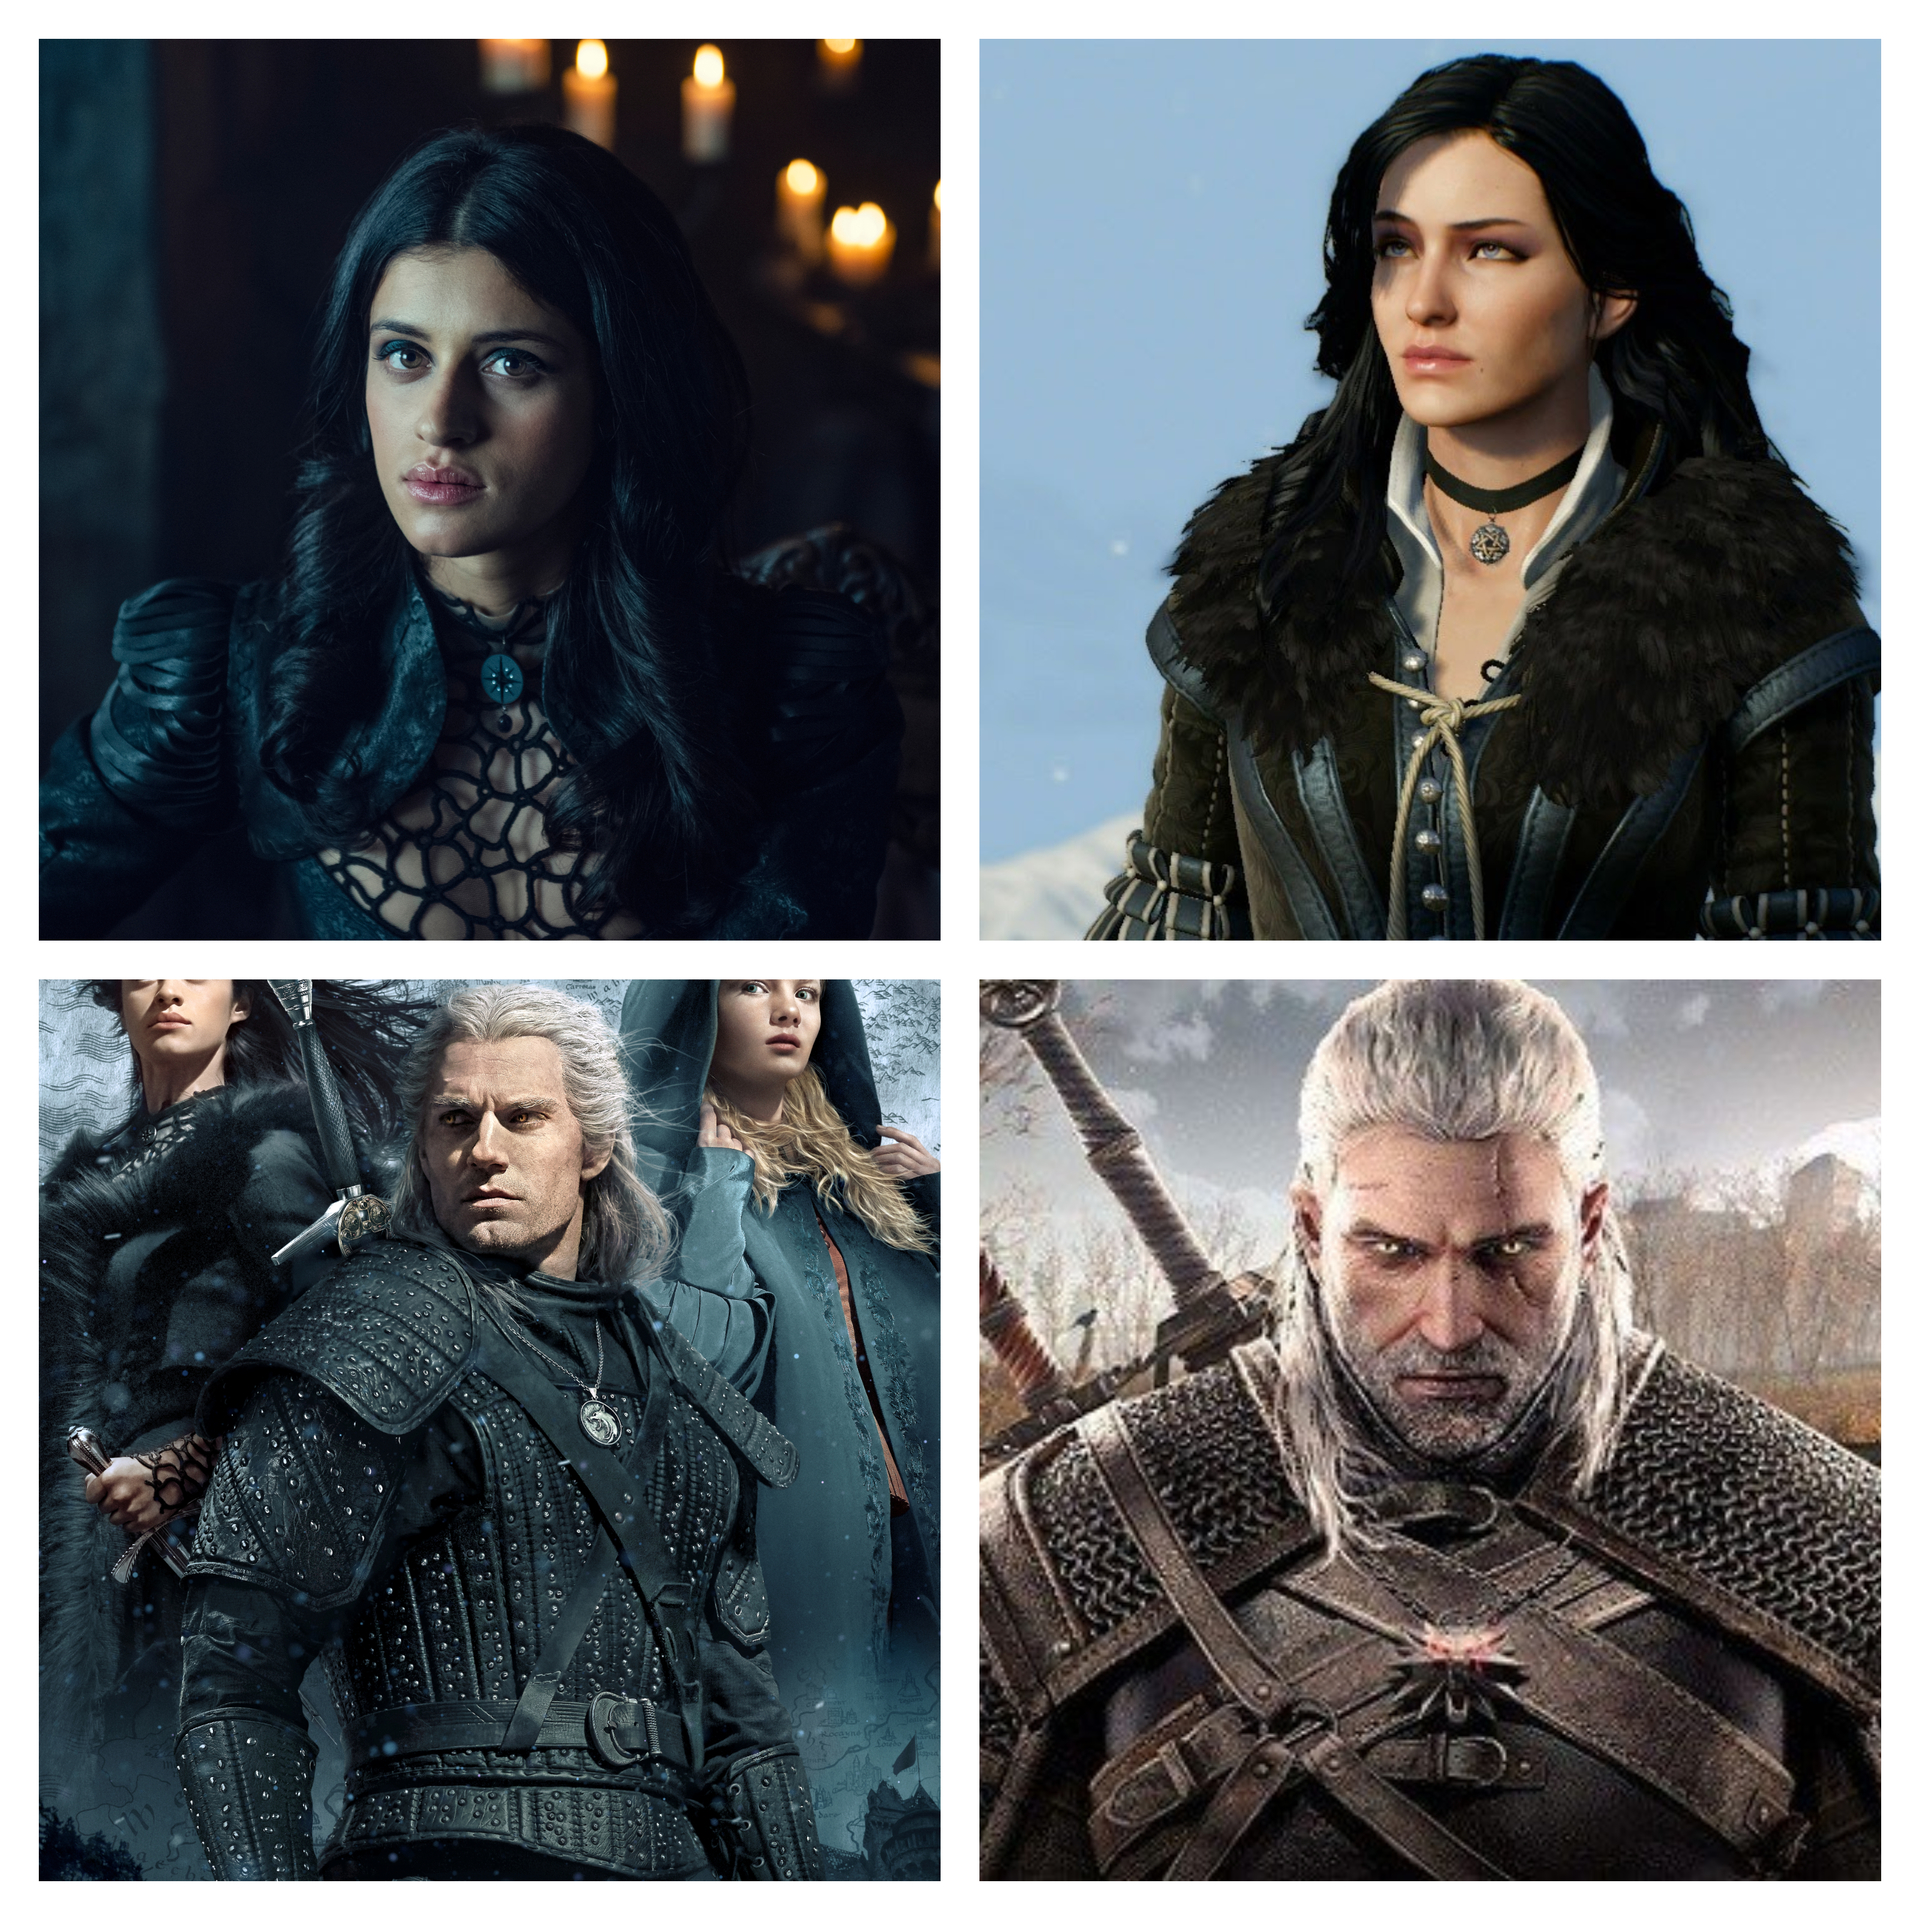 The Witcher Netflix review: What we loved and hated - Android Authority